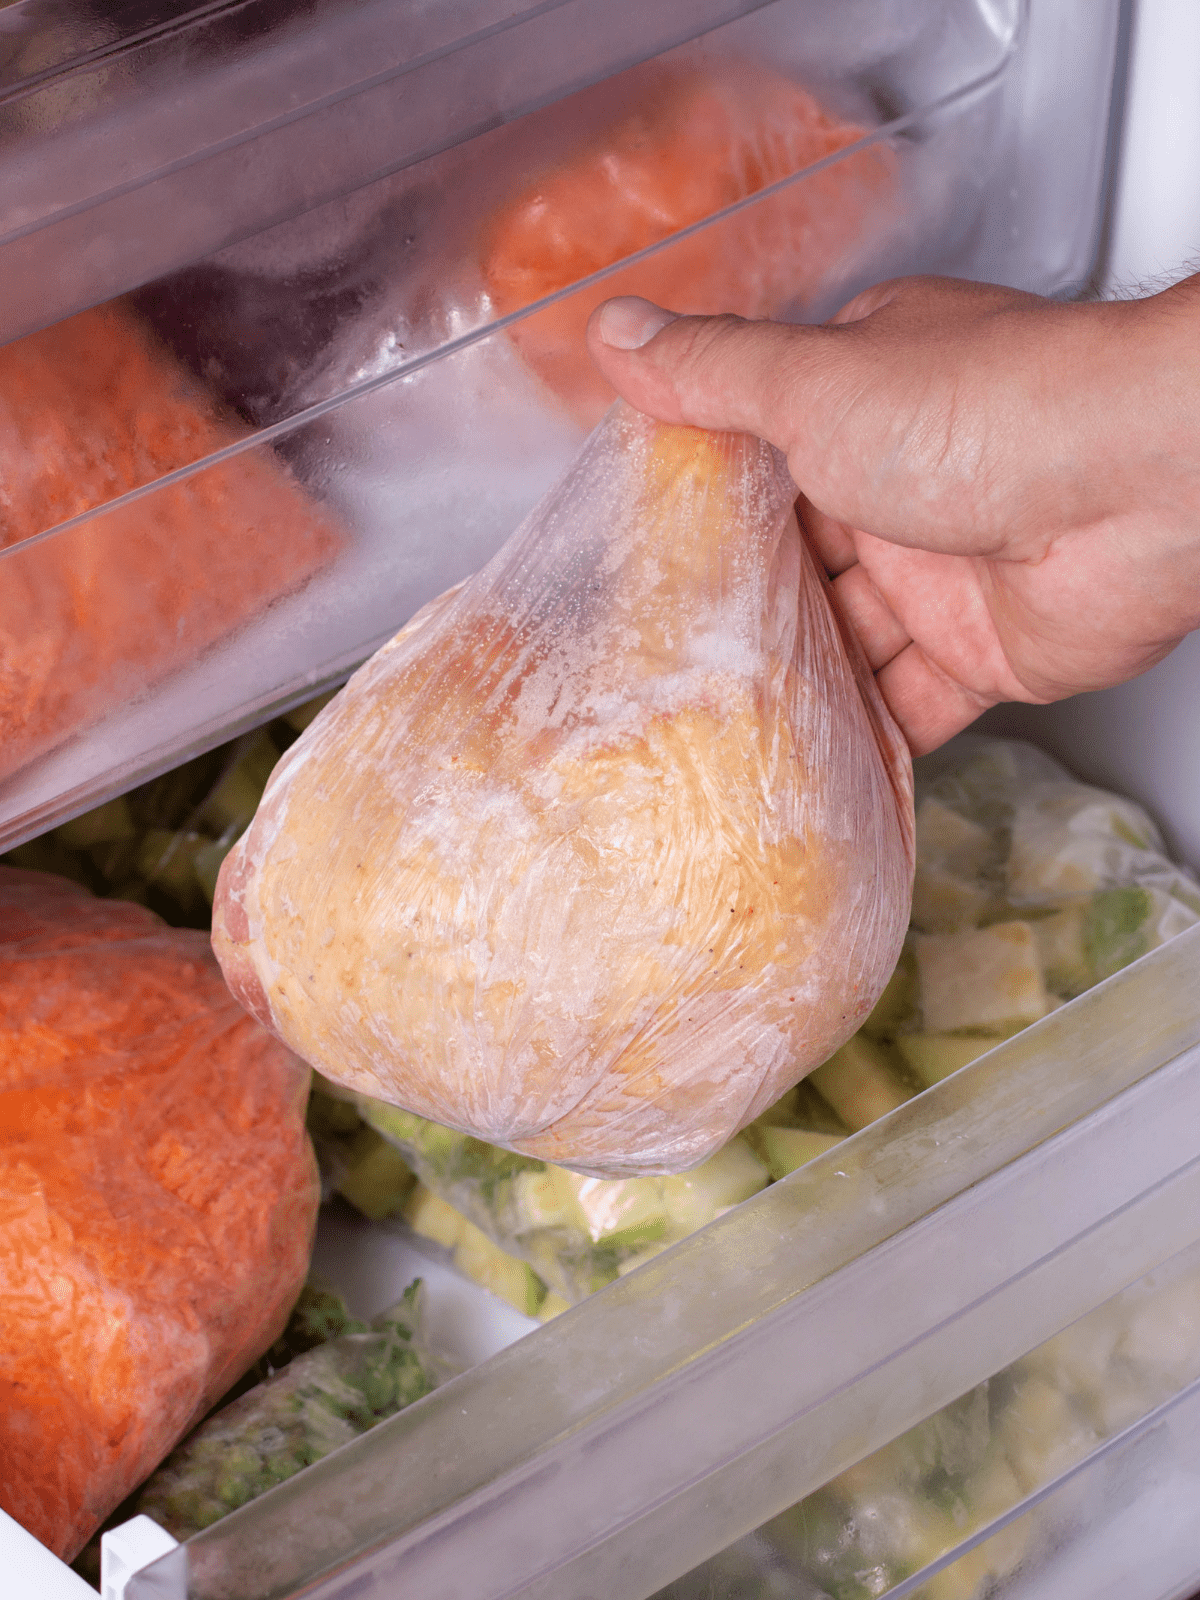 A whole frozen chicken being lifted out of the freezer drawer.